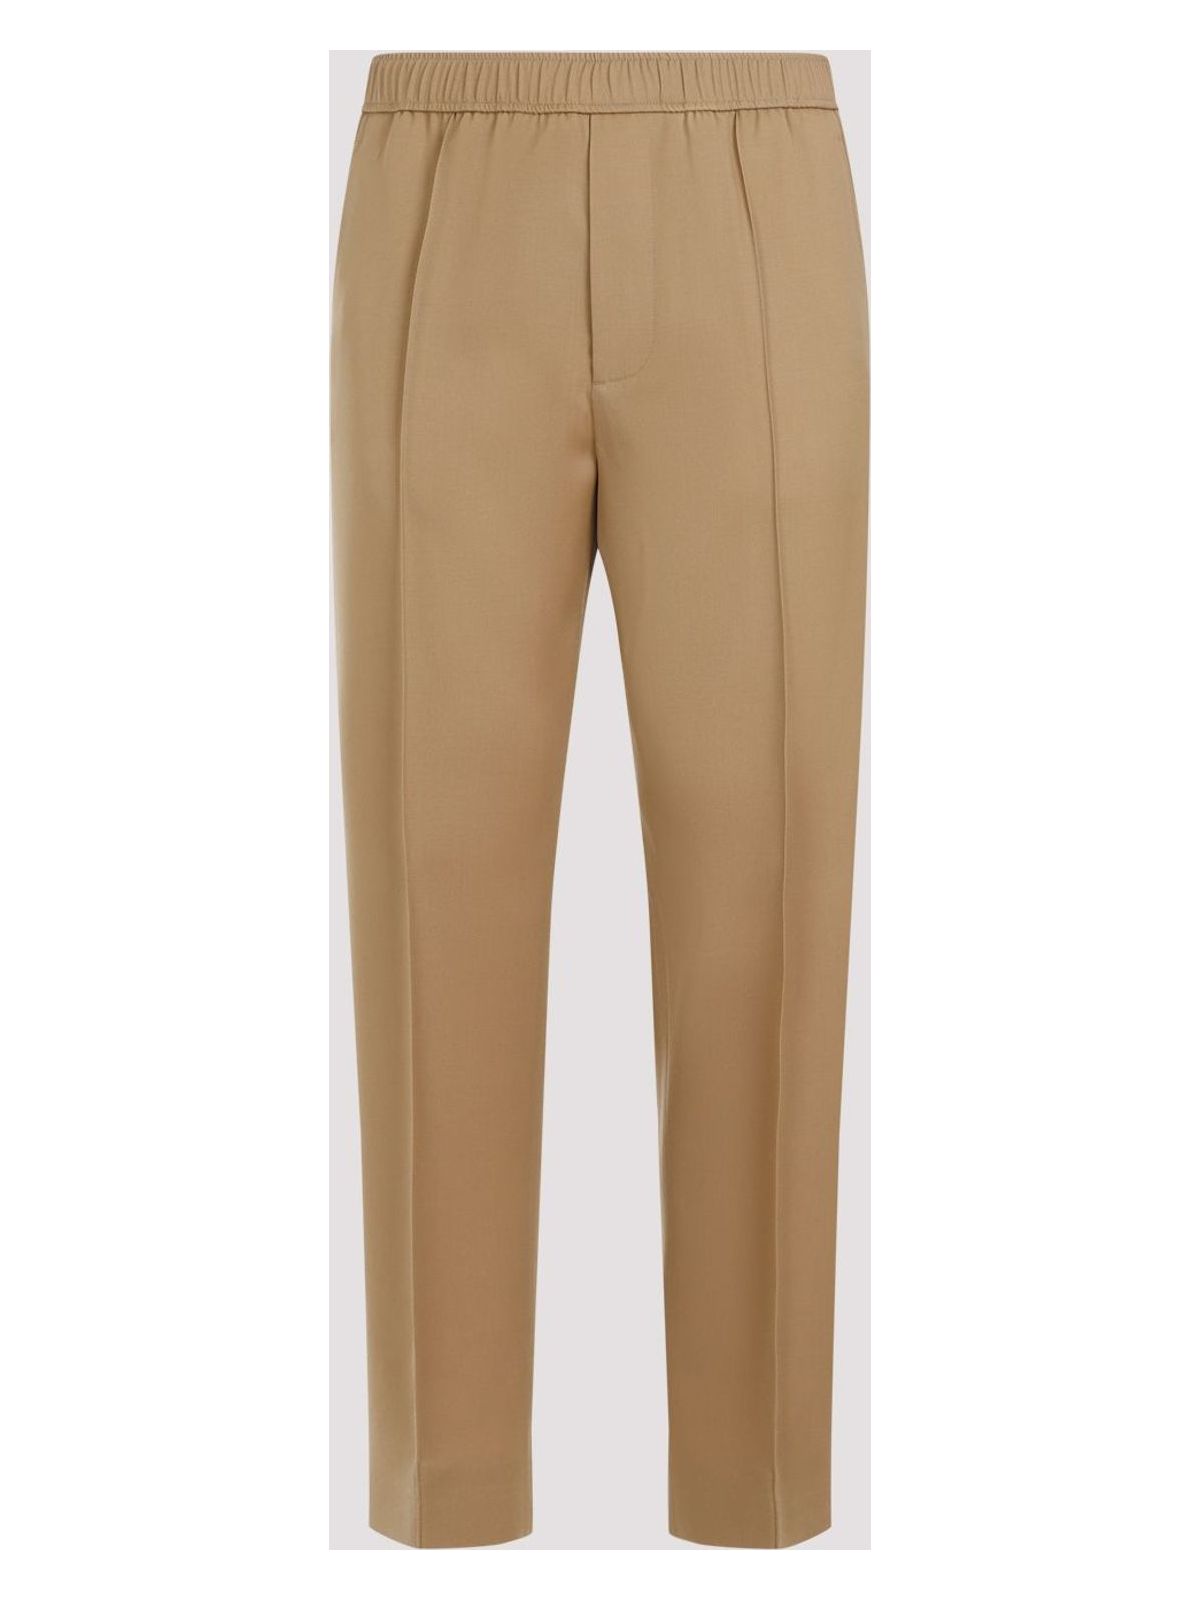 653 LANVIN TAPERED ELASTICATED TROUSERS